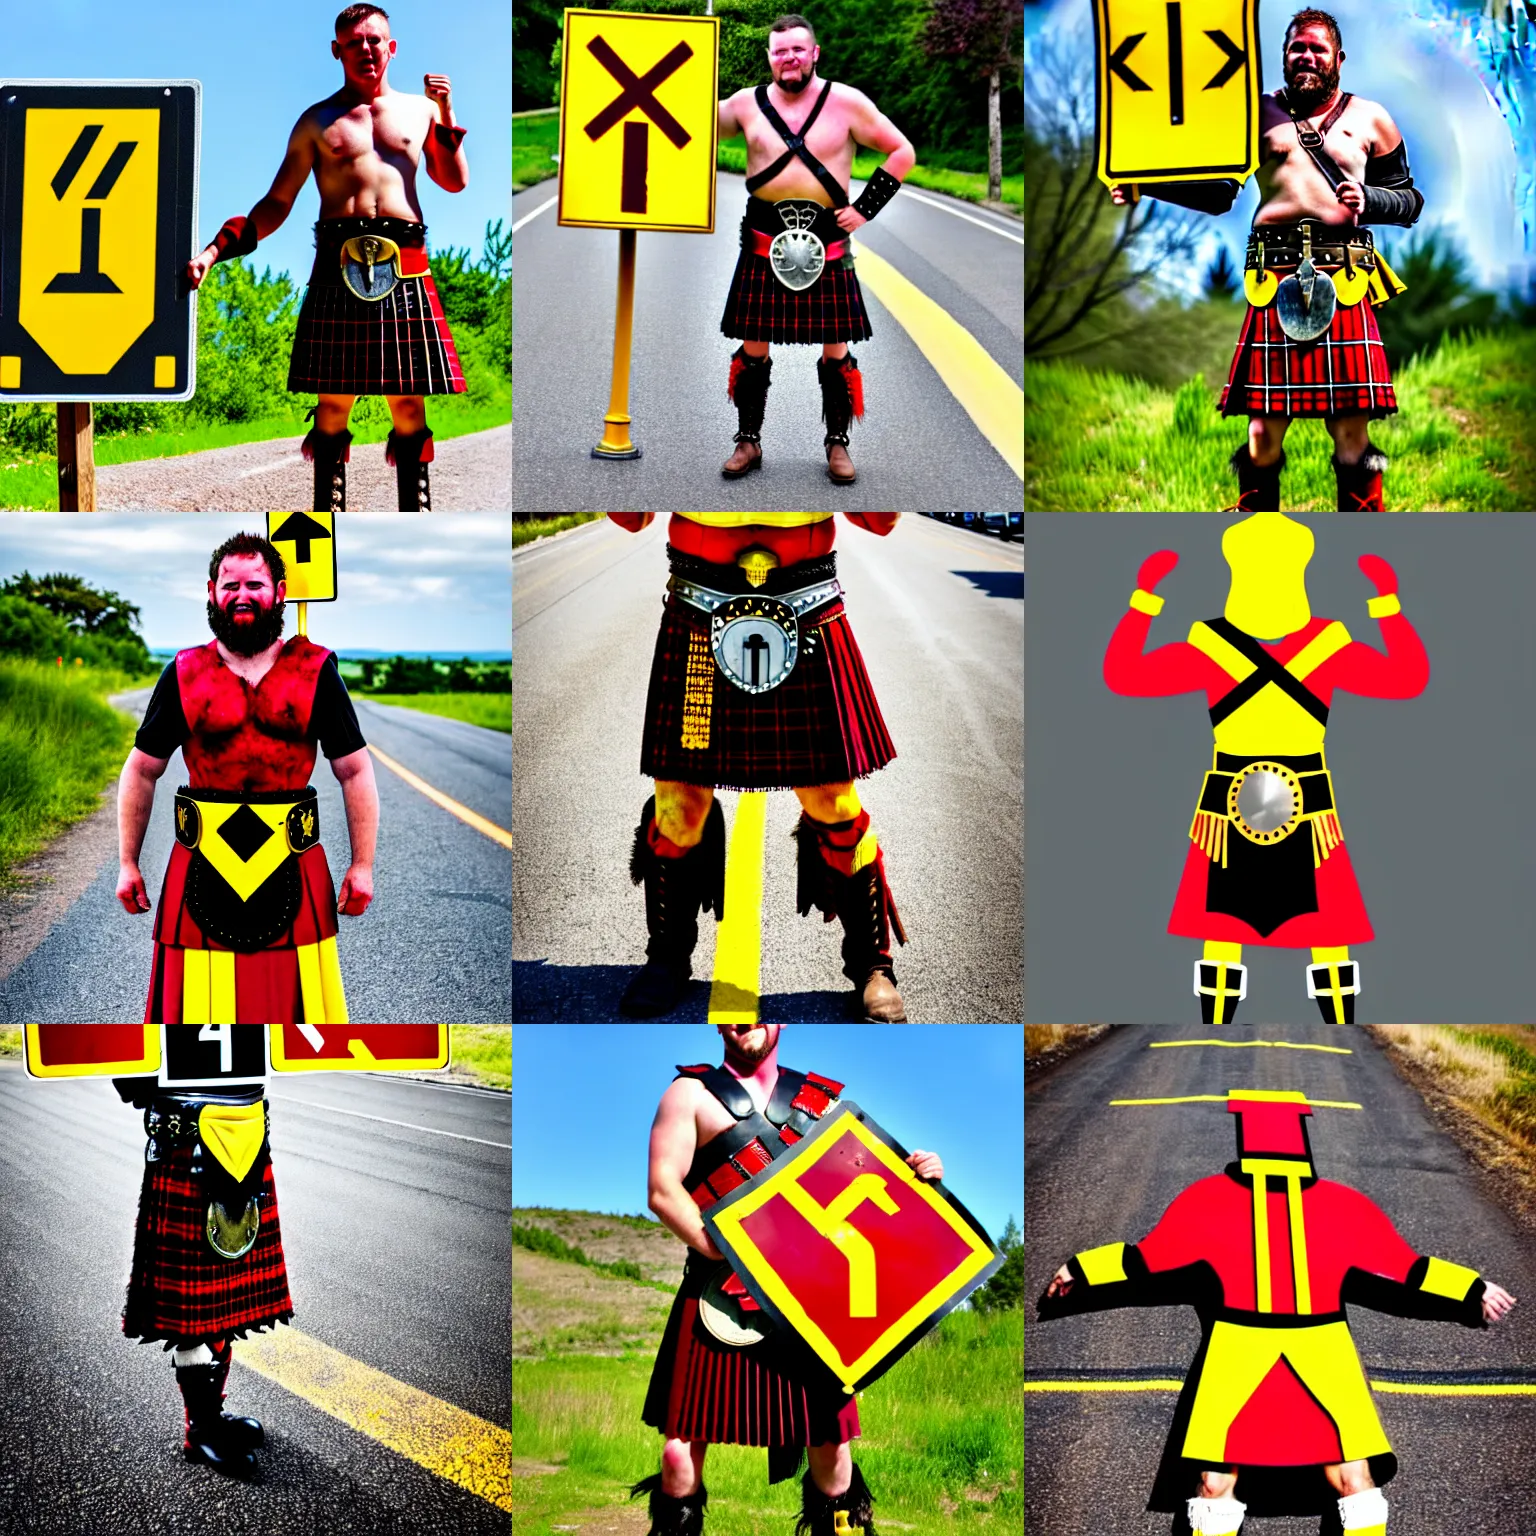 Prompt: gladiator wearing a road sign on his kilt, red and yellow road sign armor